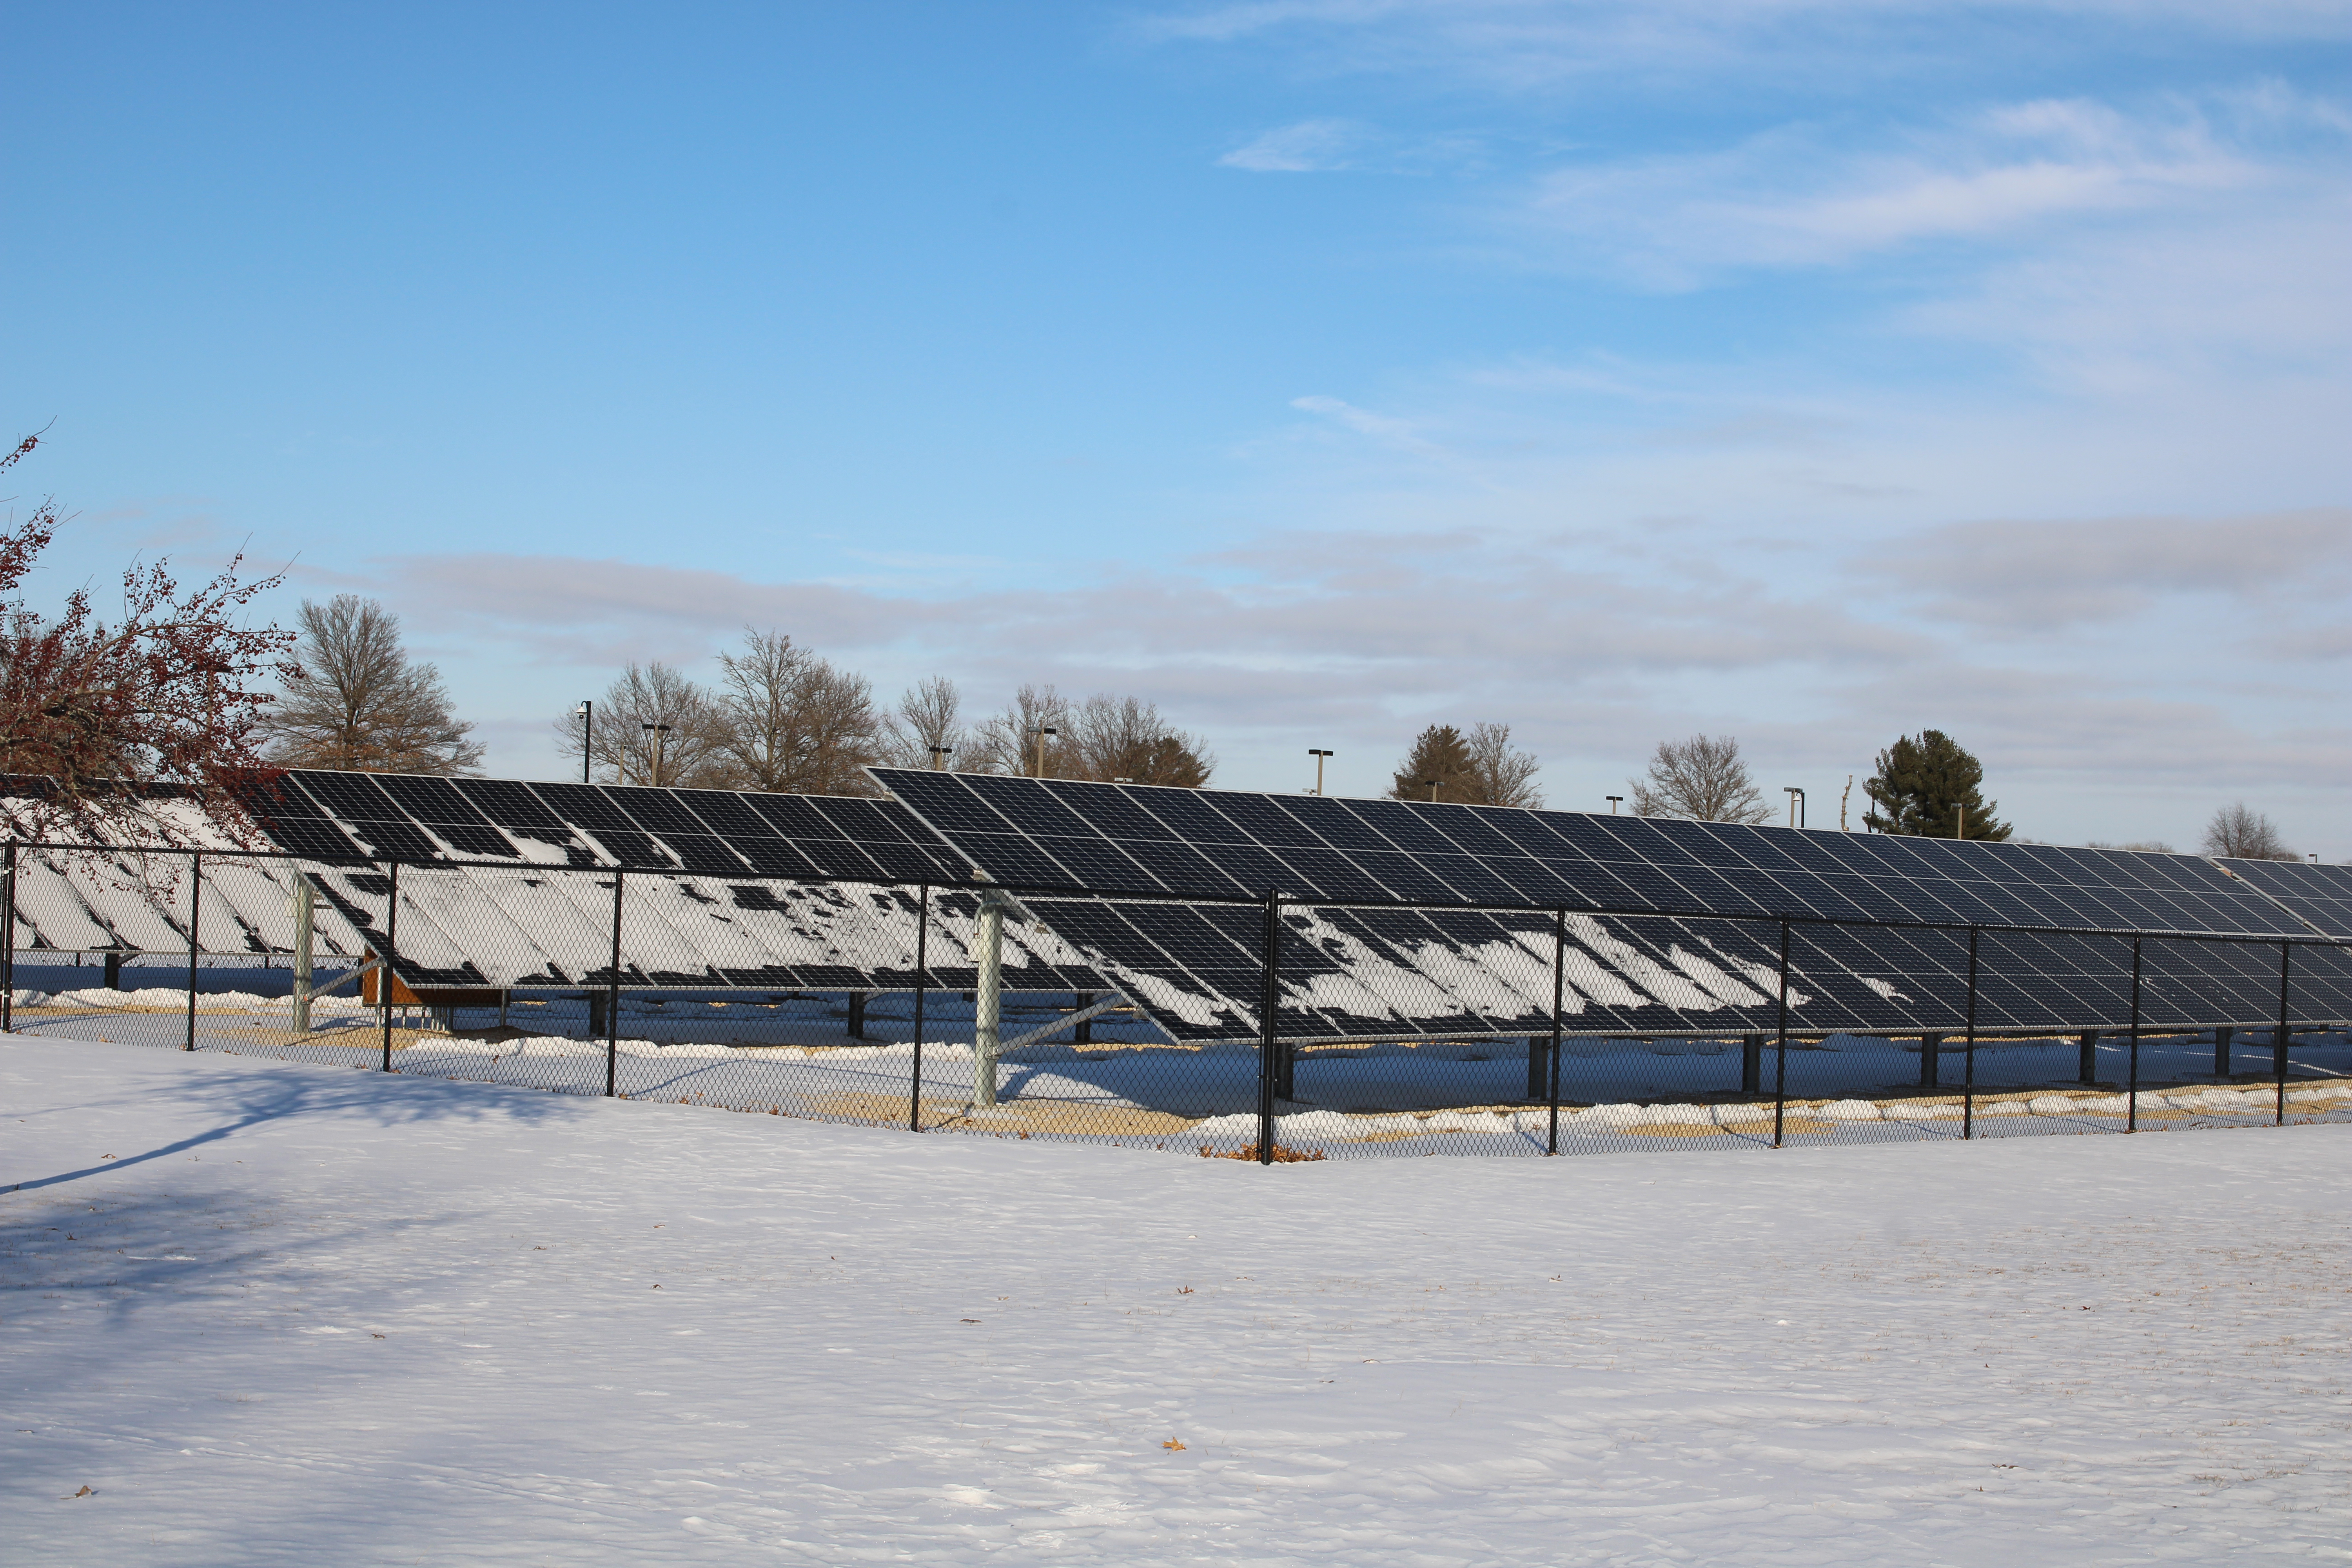 Sauk Valley Community College's very own private network of solar panels.